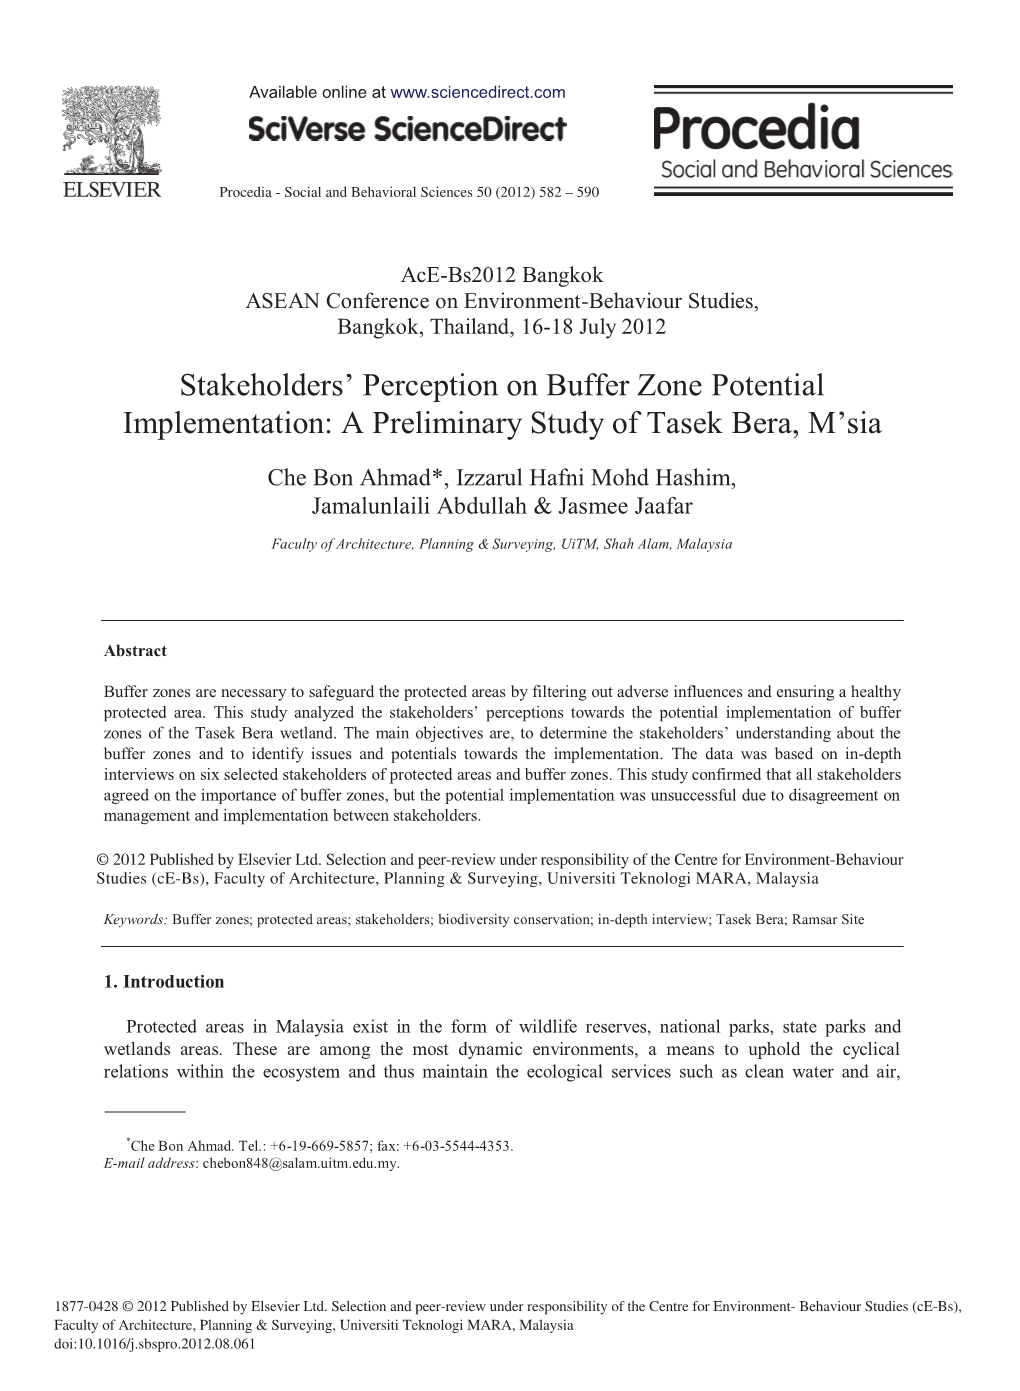 Stakeholders' Perception on Buffer Zone Potential